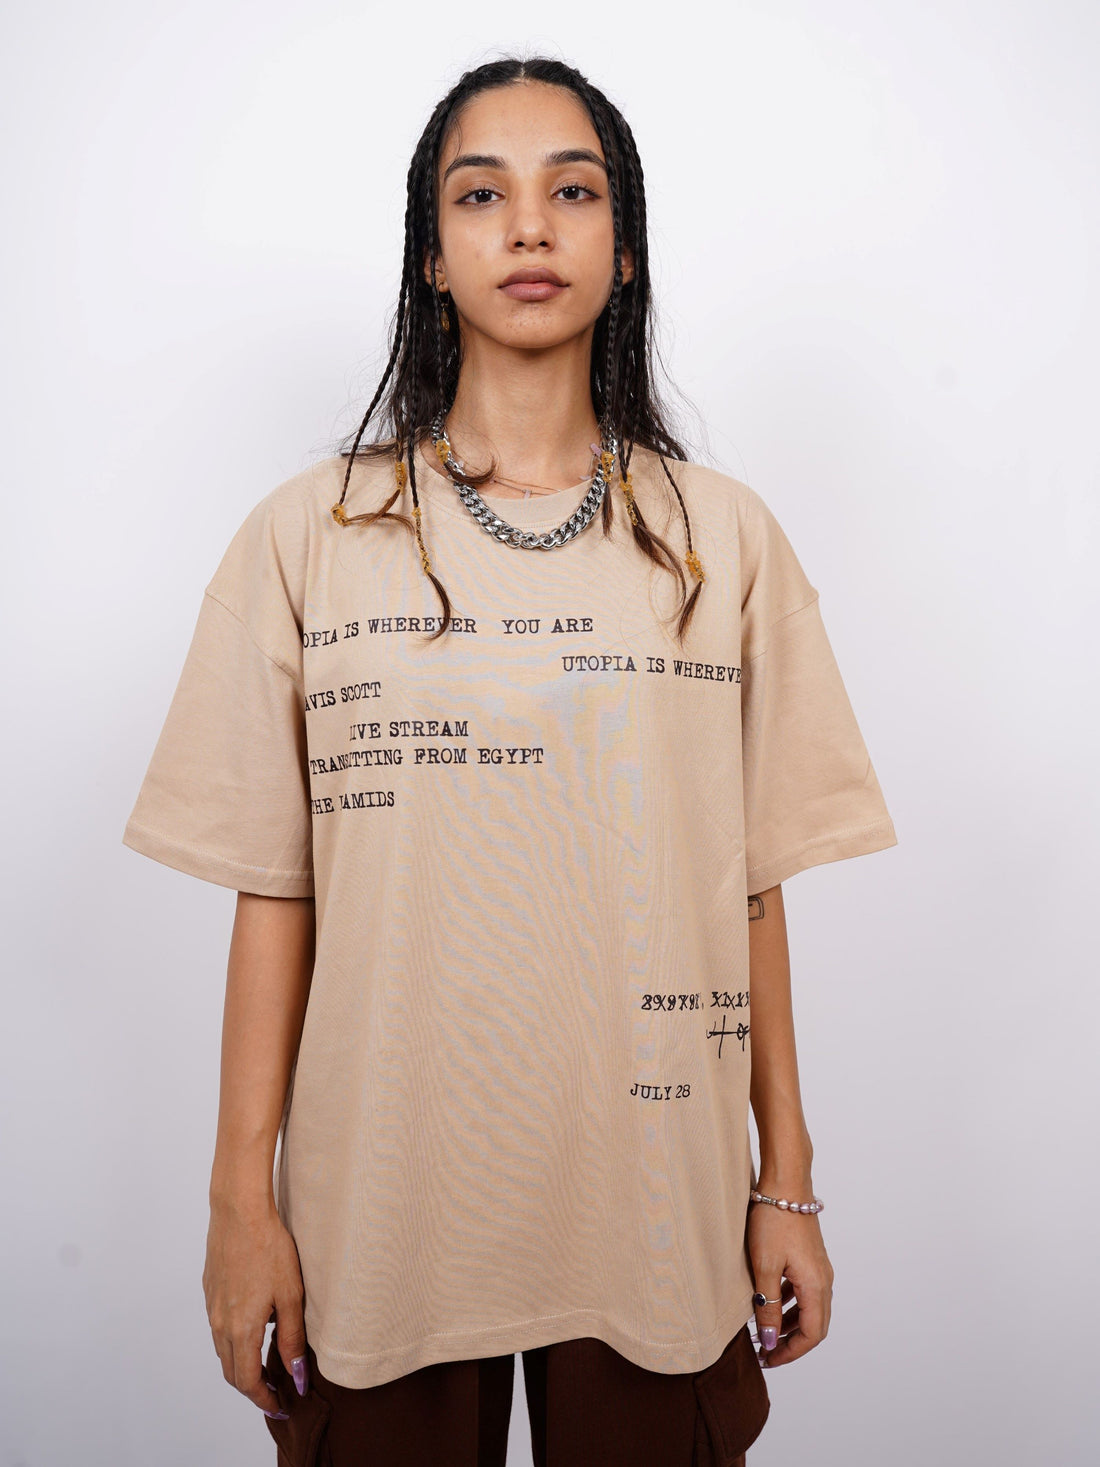 Travis Scott : The Pyramids Drop Sleeved  Tee For Men and Women